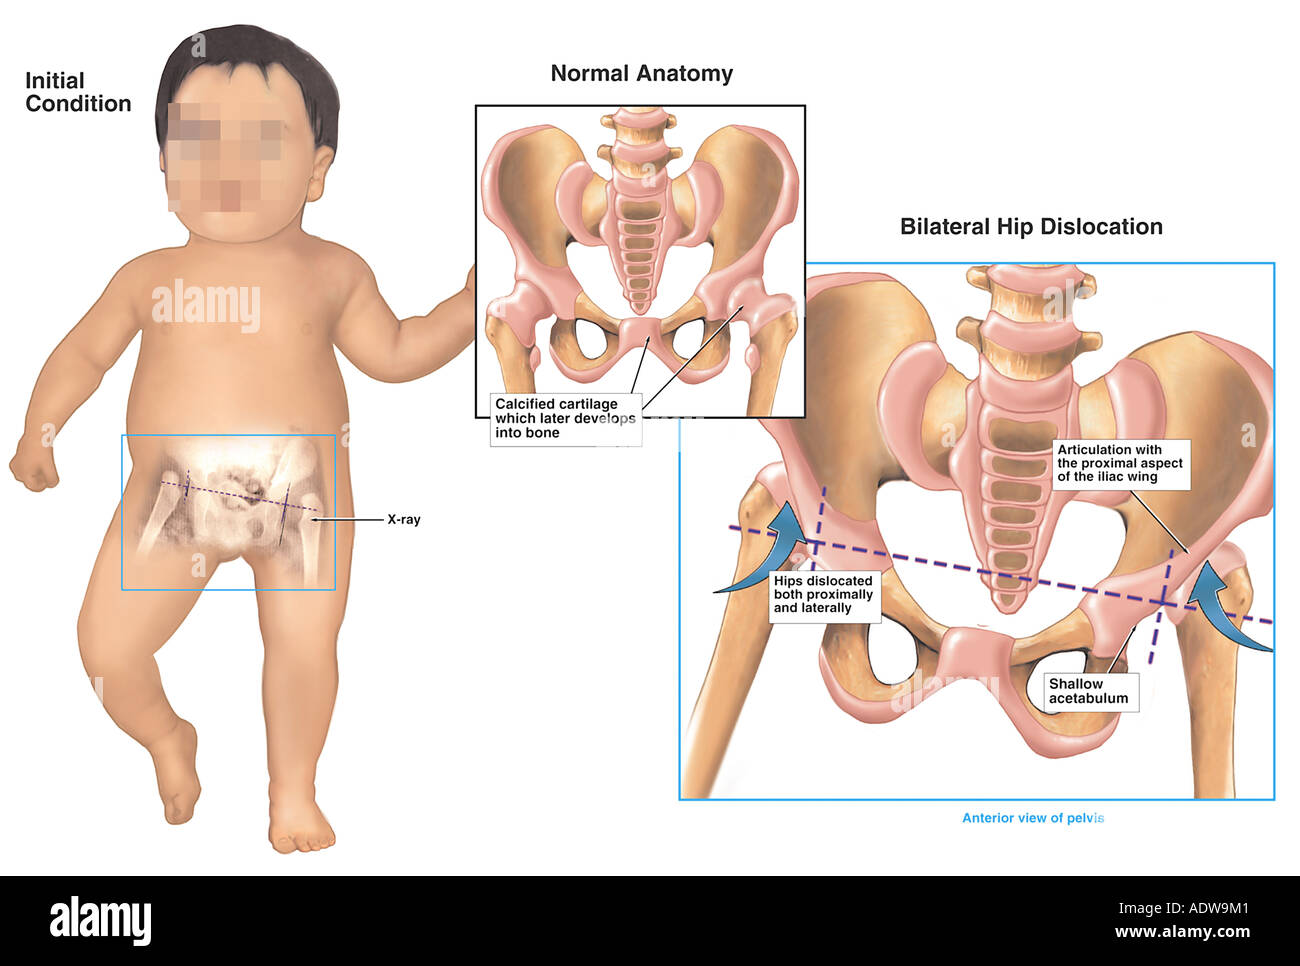 hip dislocation in babies